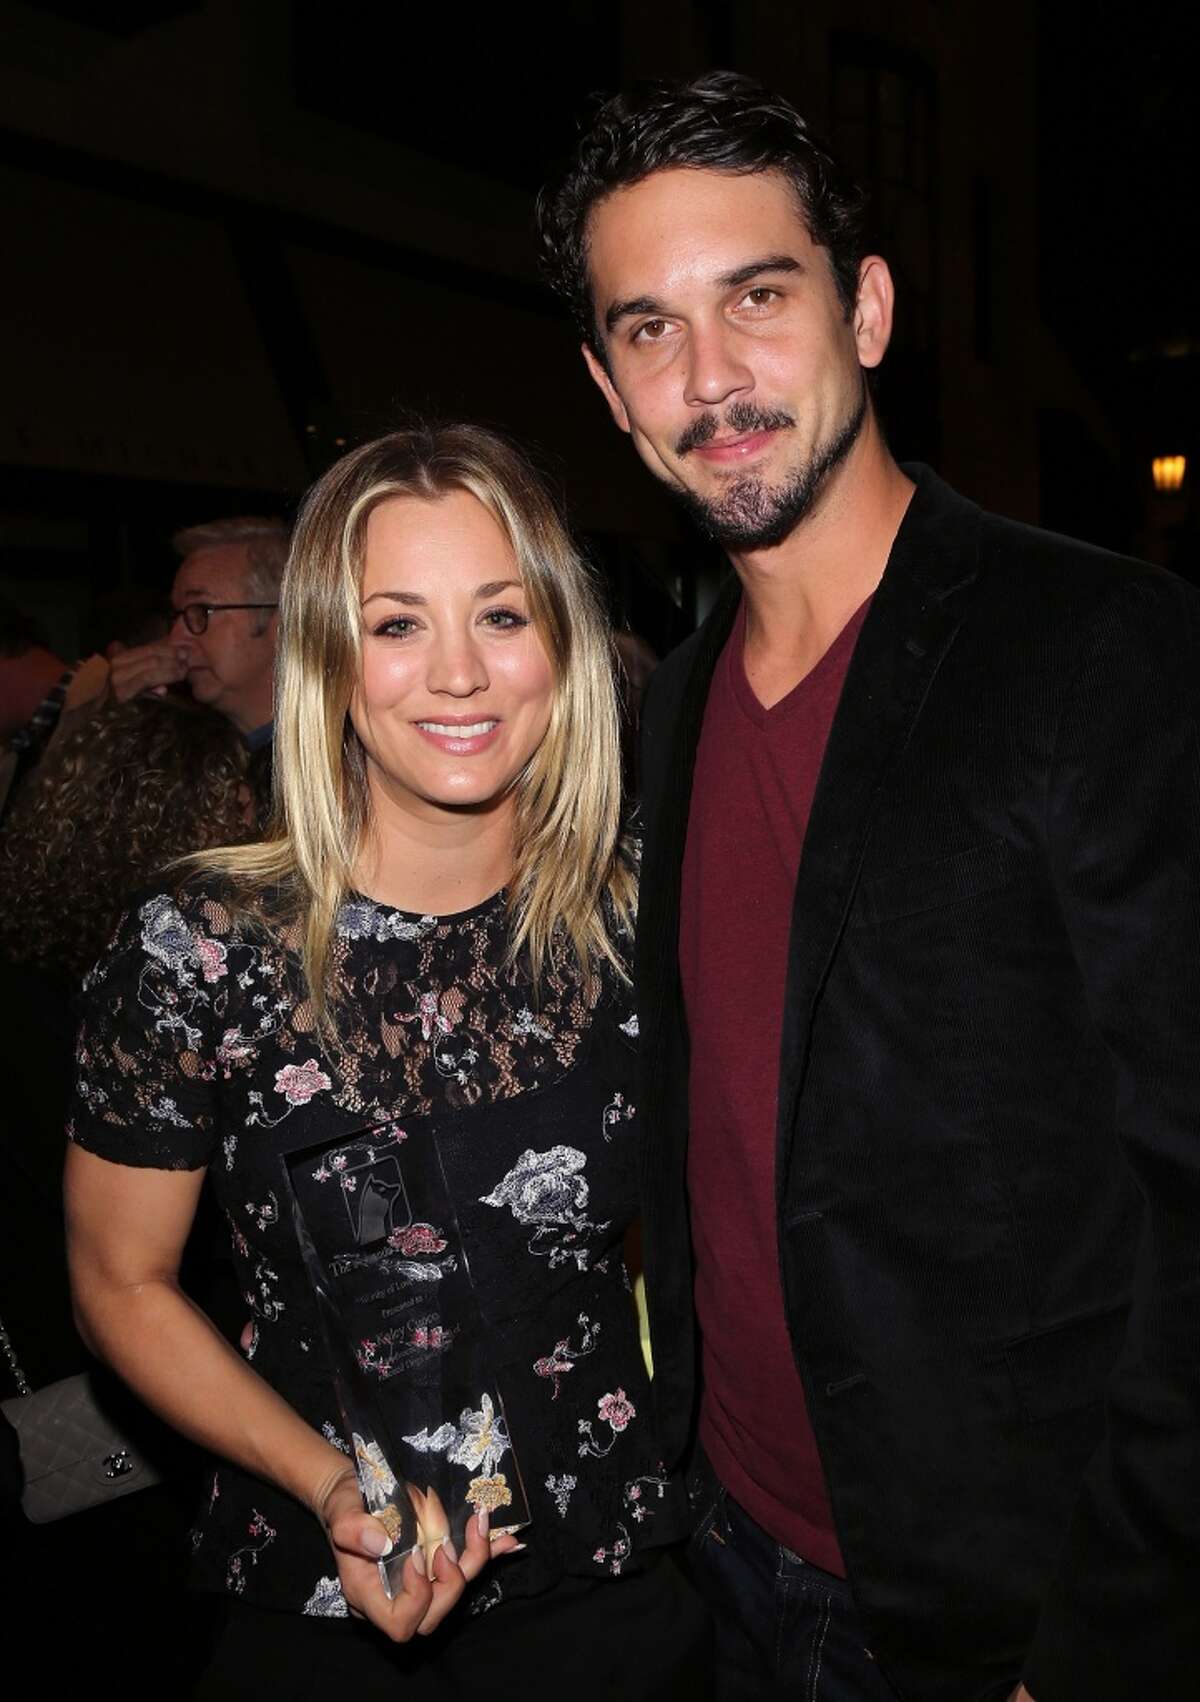 Actress Kaley Cuoco (L) and professional tennis player Ryan Sweeting were married on New Year's Eve 2013.